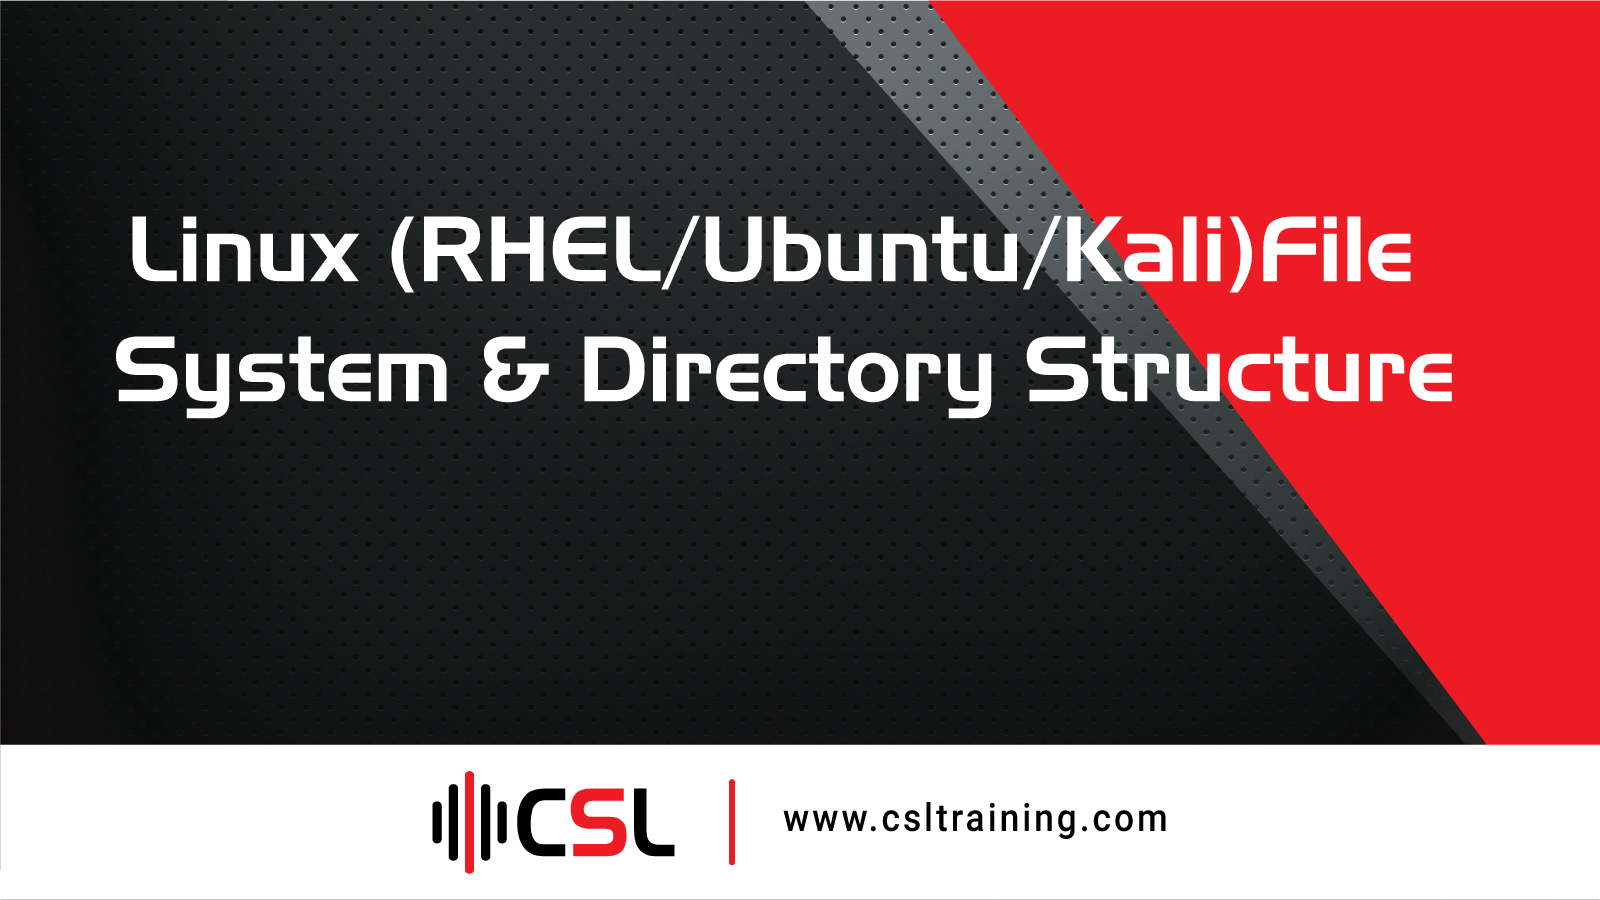 You are currently viewing Linux (RHEL/Ubuntu/Kali) File System & Directory Structure